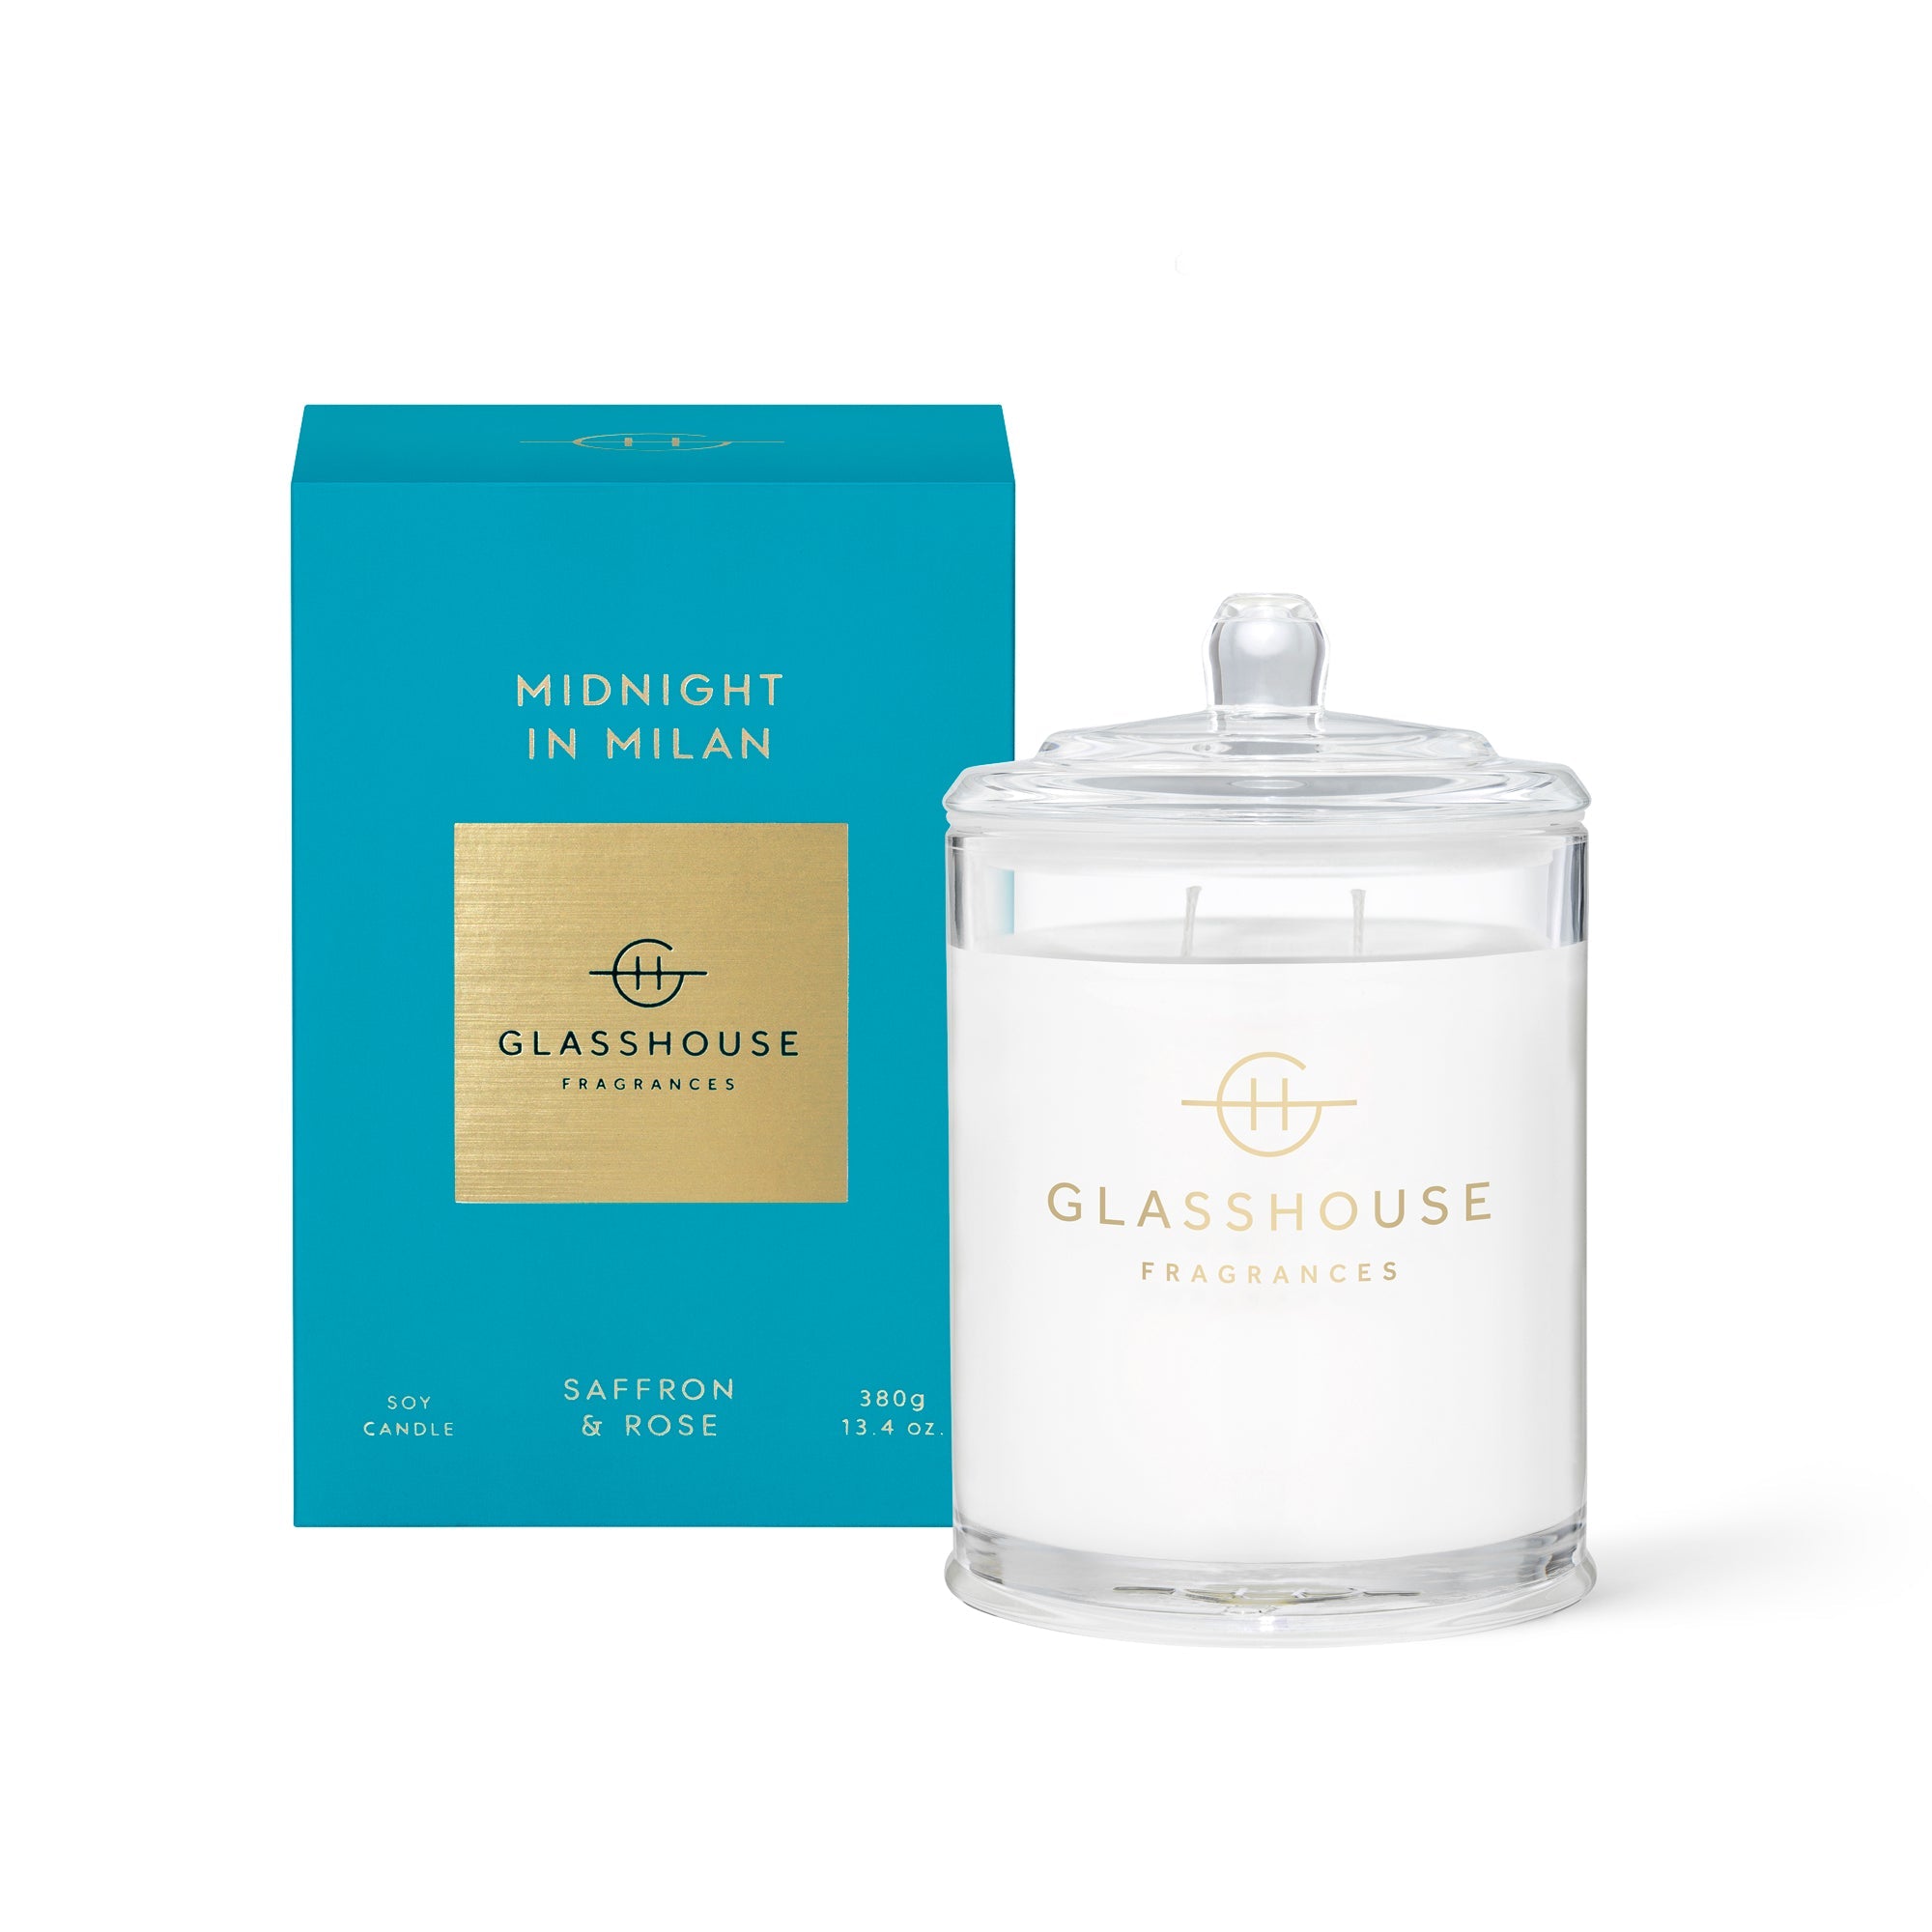 Glasshouse Midnight In Milan Candle 380g - Exquisite Laser Clinic